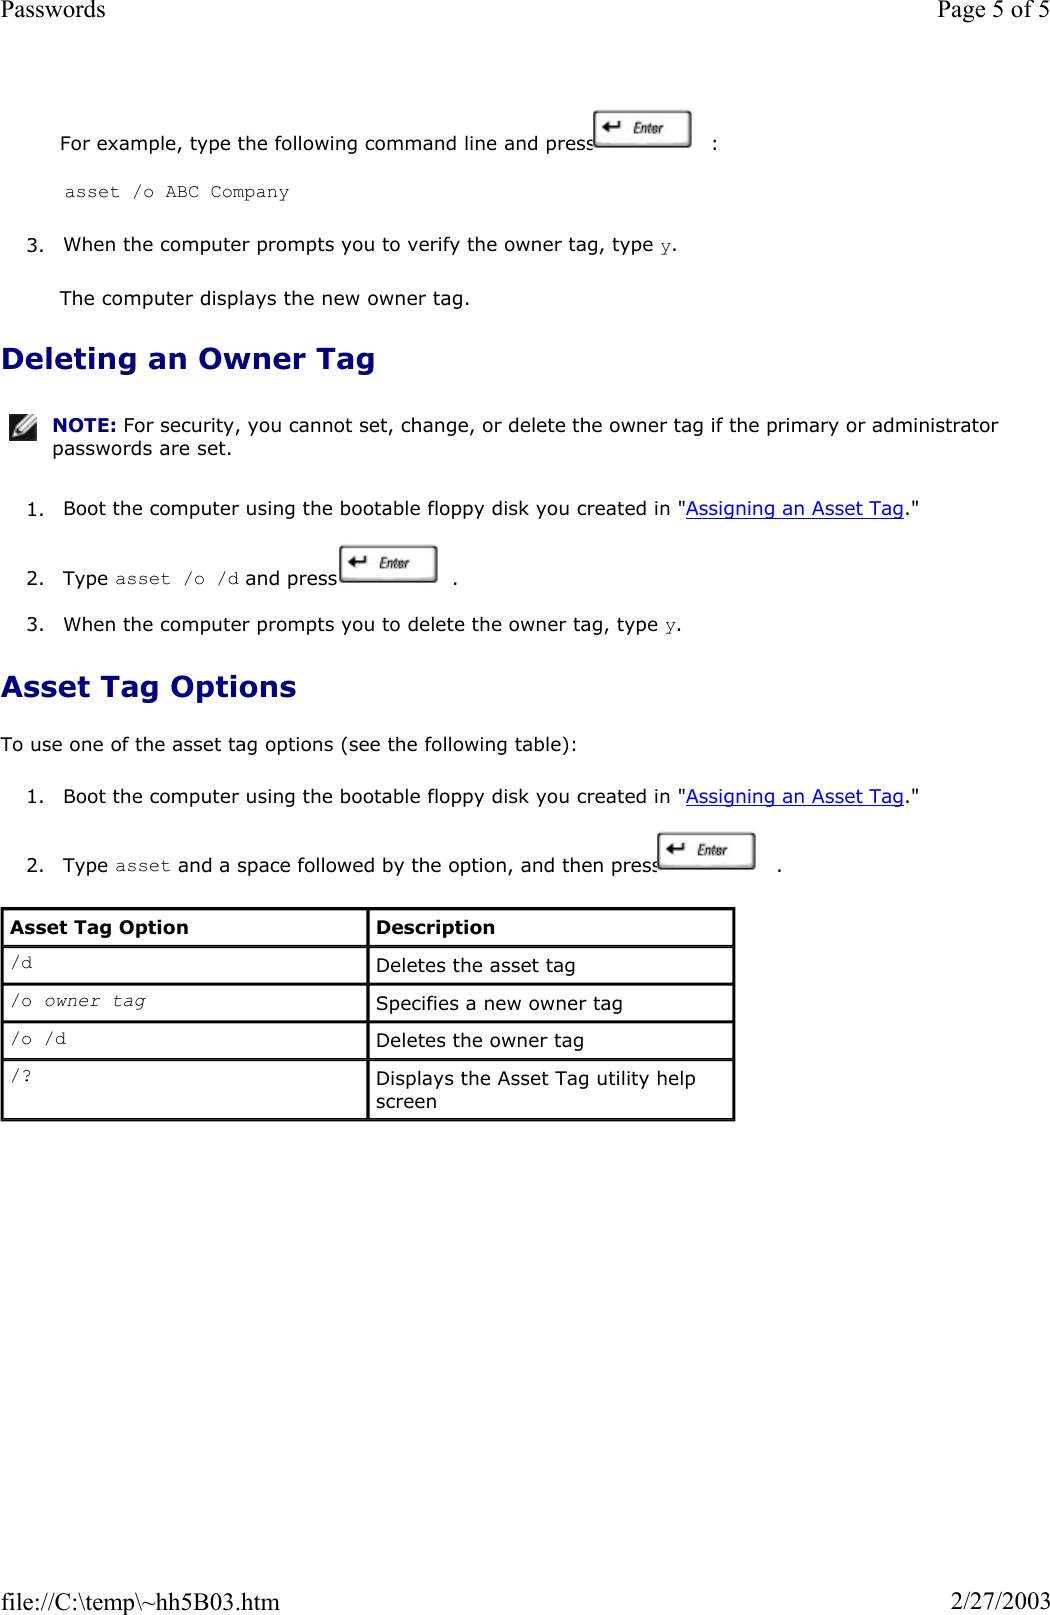 For example, type the following command line and press   : asset /o ABC Company  3. When the computer prompts you to verify the owner tag, type y.The computer displays the new owner tag. Deleting an Owner Tag 1. Boot the computer using the bootable floppy disk you created in &quot;Assigning an Asset Tag.&quot;  2. Type asset /o /d and press   . 3. When the computer prompts you to delete the owner tag, type y.Asset Tag Options To use one of the asset tag options (see the following table): 1. Boot the computer using the bootable floppy disk you created in &quot;Assigning an Asset Tag.&quot;2. Type asset and a space followed by the option, and then press   . NOTE: For security, you cannot set, change, or delete the owner tag if the primary or administrator passwords are set.Asset Tag Option  Description /d Deletes the asset tag /o owner tag  Specifies a new owner tag /o /d Deletes the owner tag /? Displays the Asset Tag utility help screen Page 5 of 5Passwords2/27/2003file://C:\temp\~hh5B03.htm